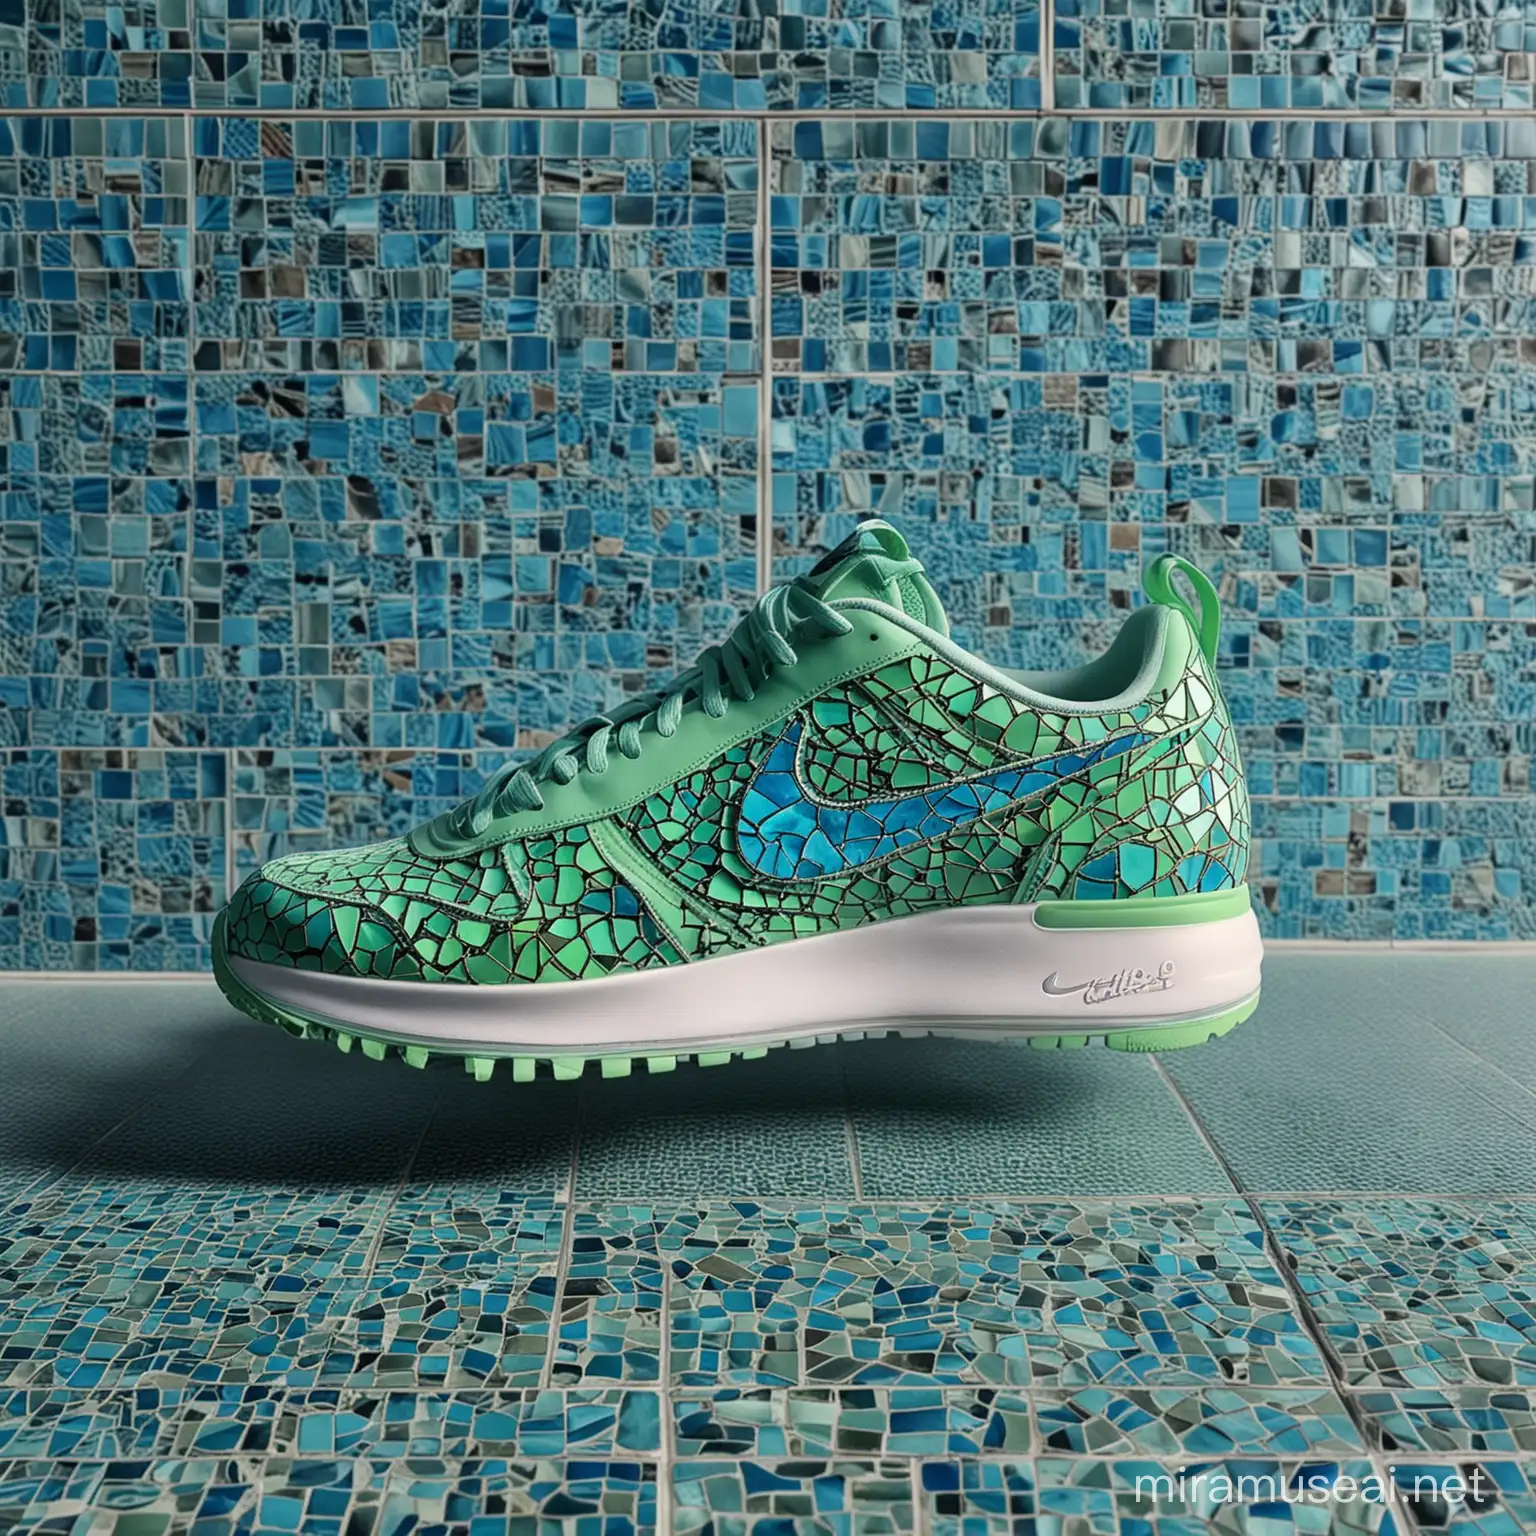 an ultra modern neon green sneakers classic nke air nike style. with shadow. moroccan  blue mosaic tiles background background.